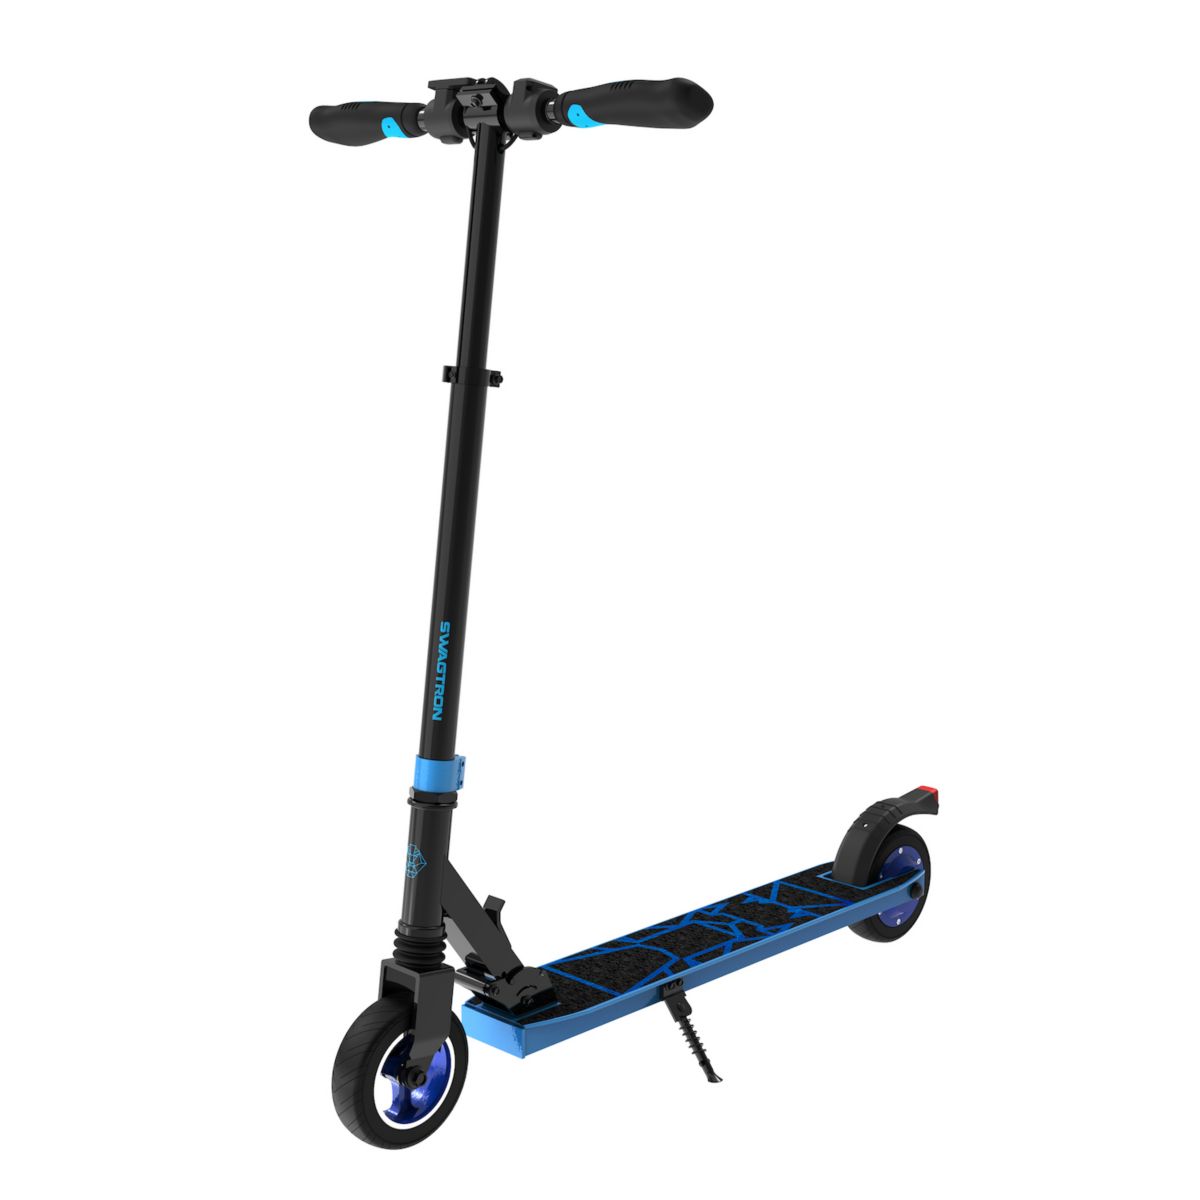 Swagtron Swagger-8 Electric Scooter Swagtron